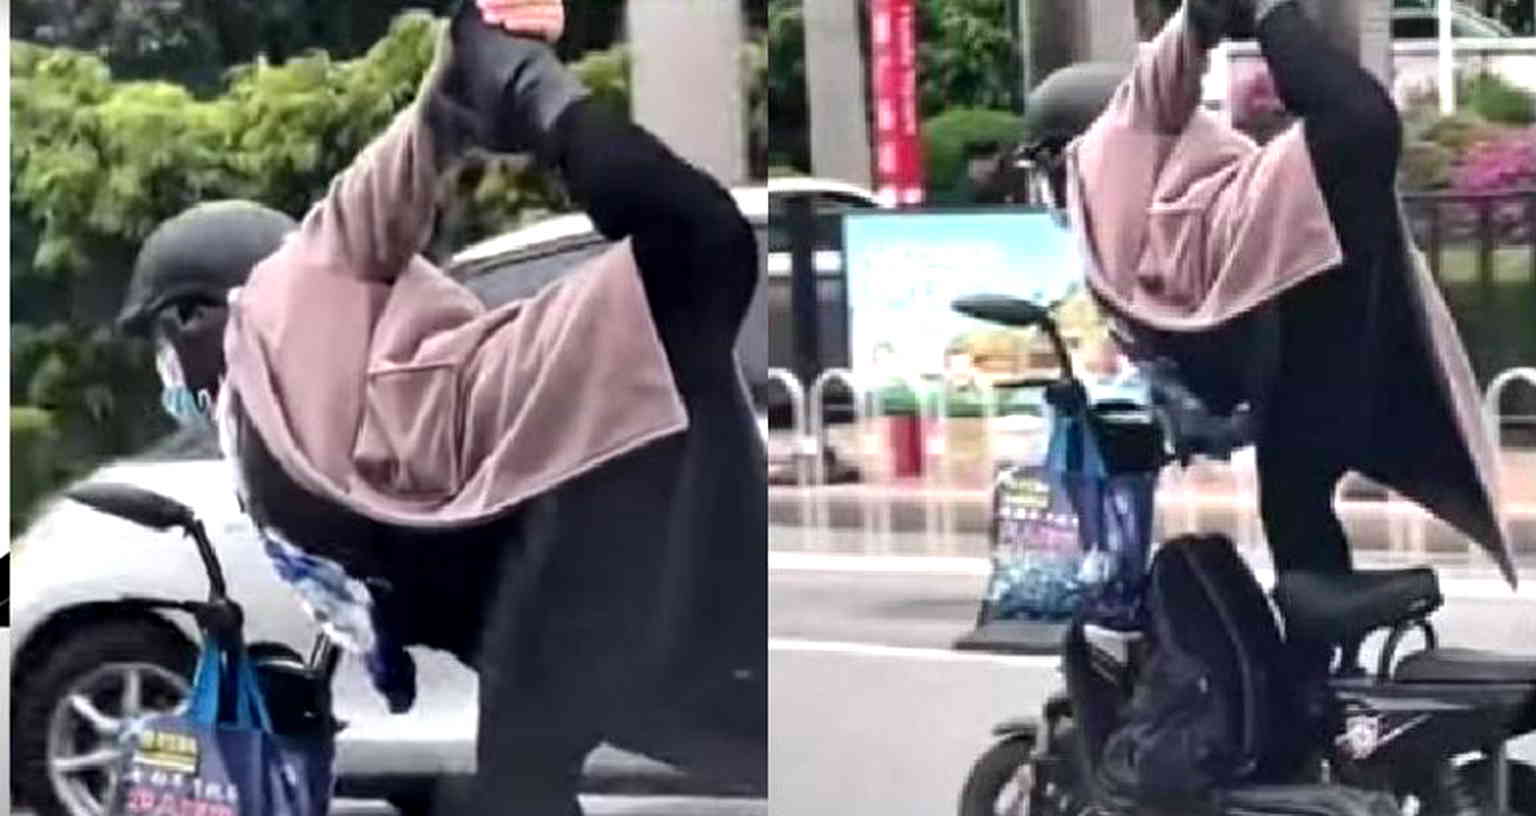 Chinese woman filmed flexing on other drivers with yoga poses while riding motorcycle